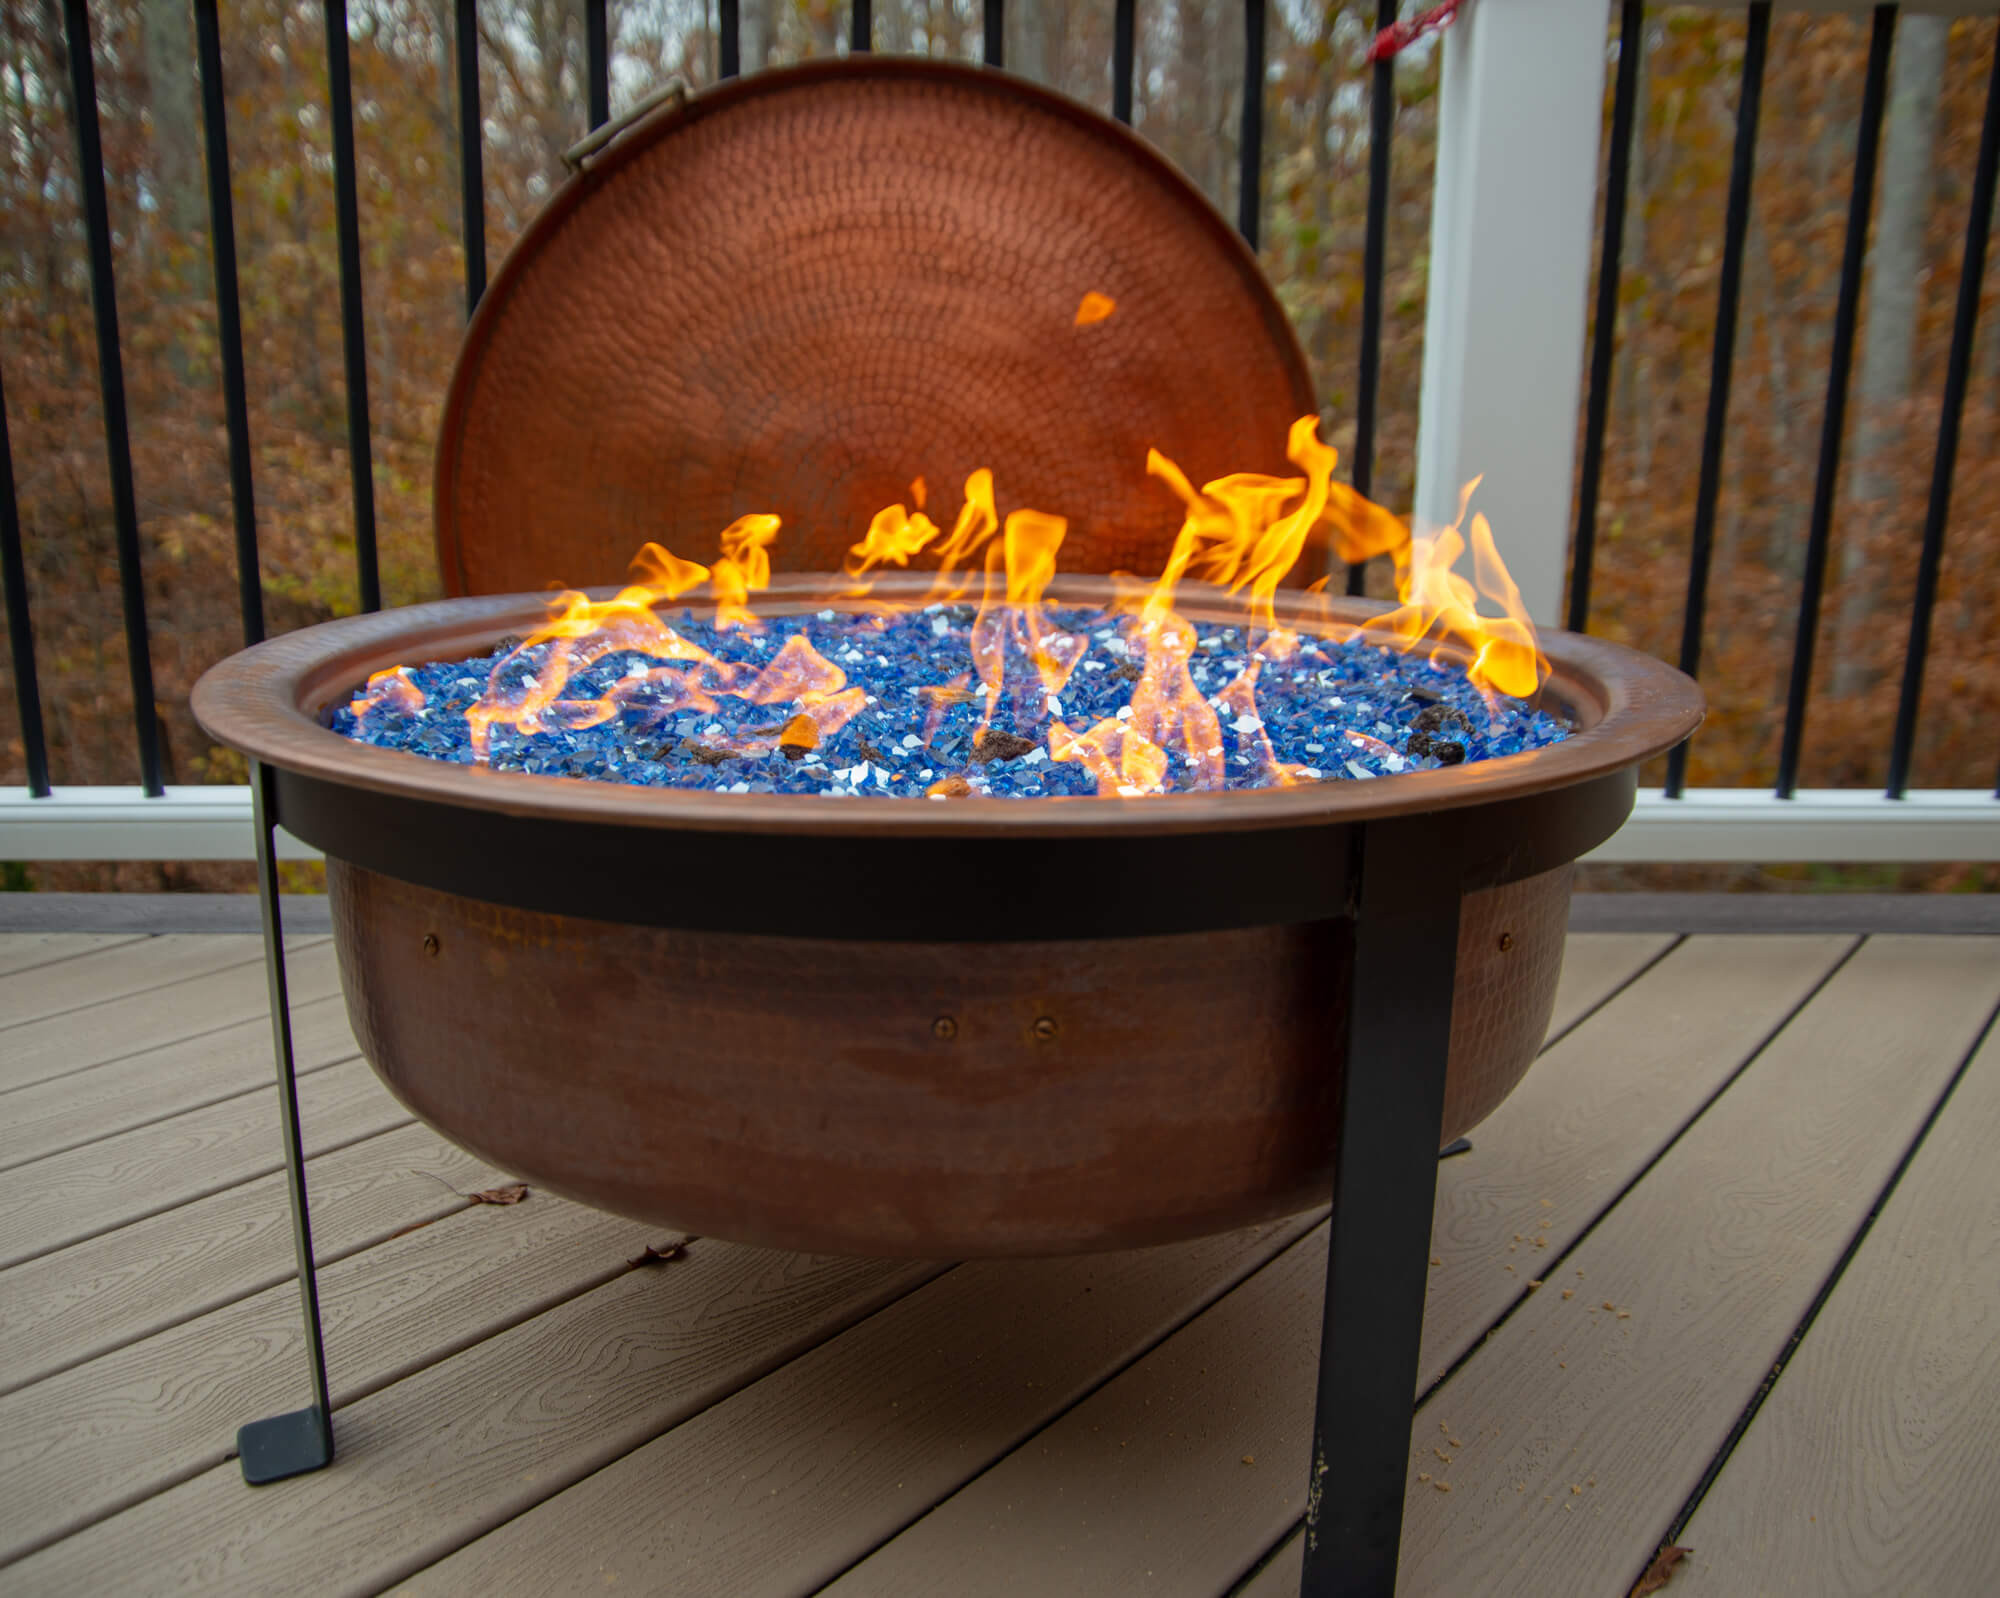 Fire Pit On Wood Deck
 6 Ways to put a Fire Pit on a Wooden Deck